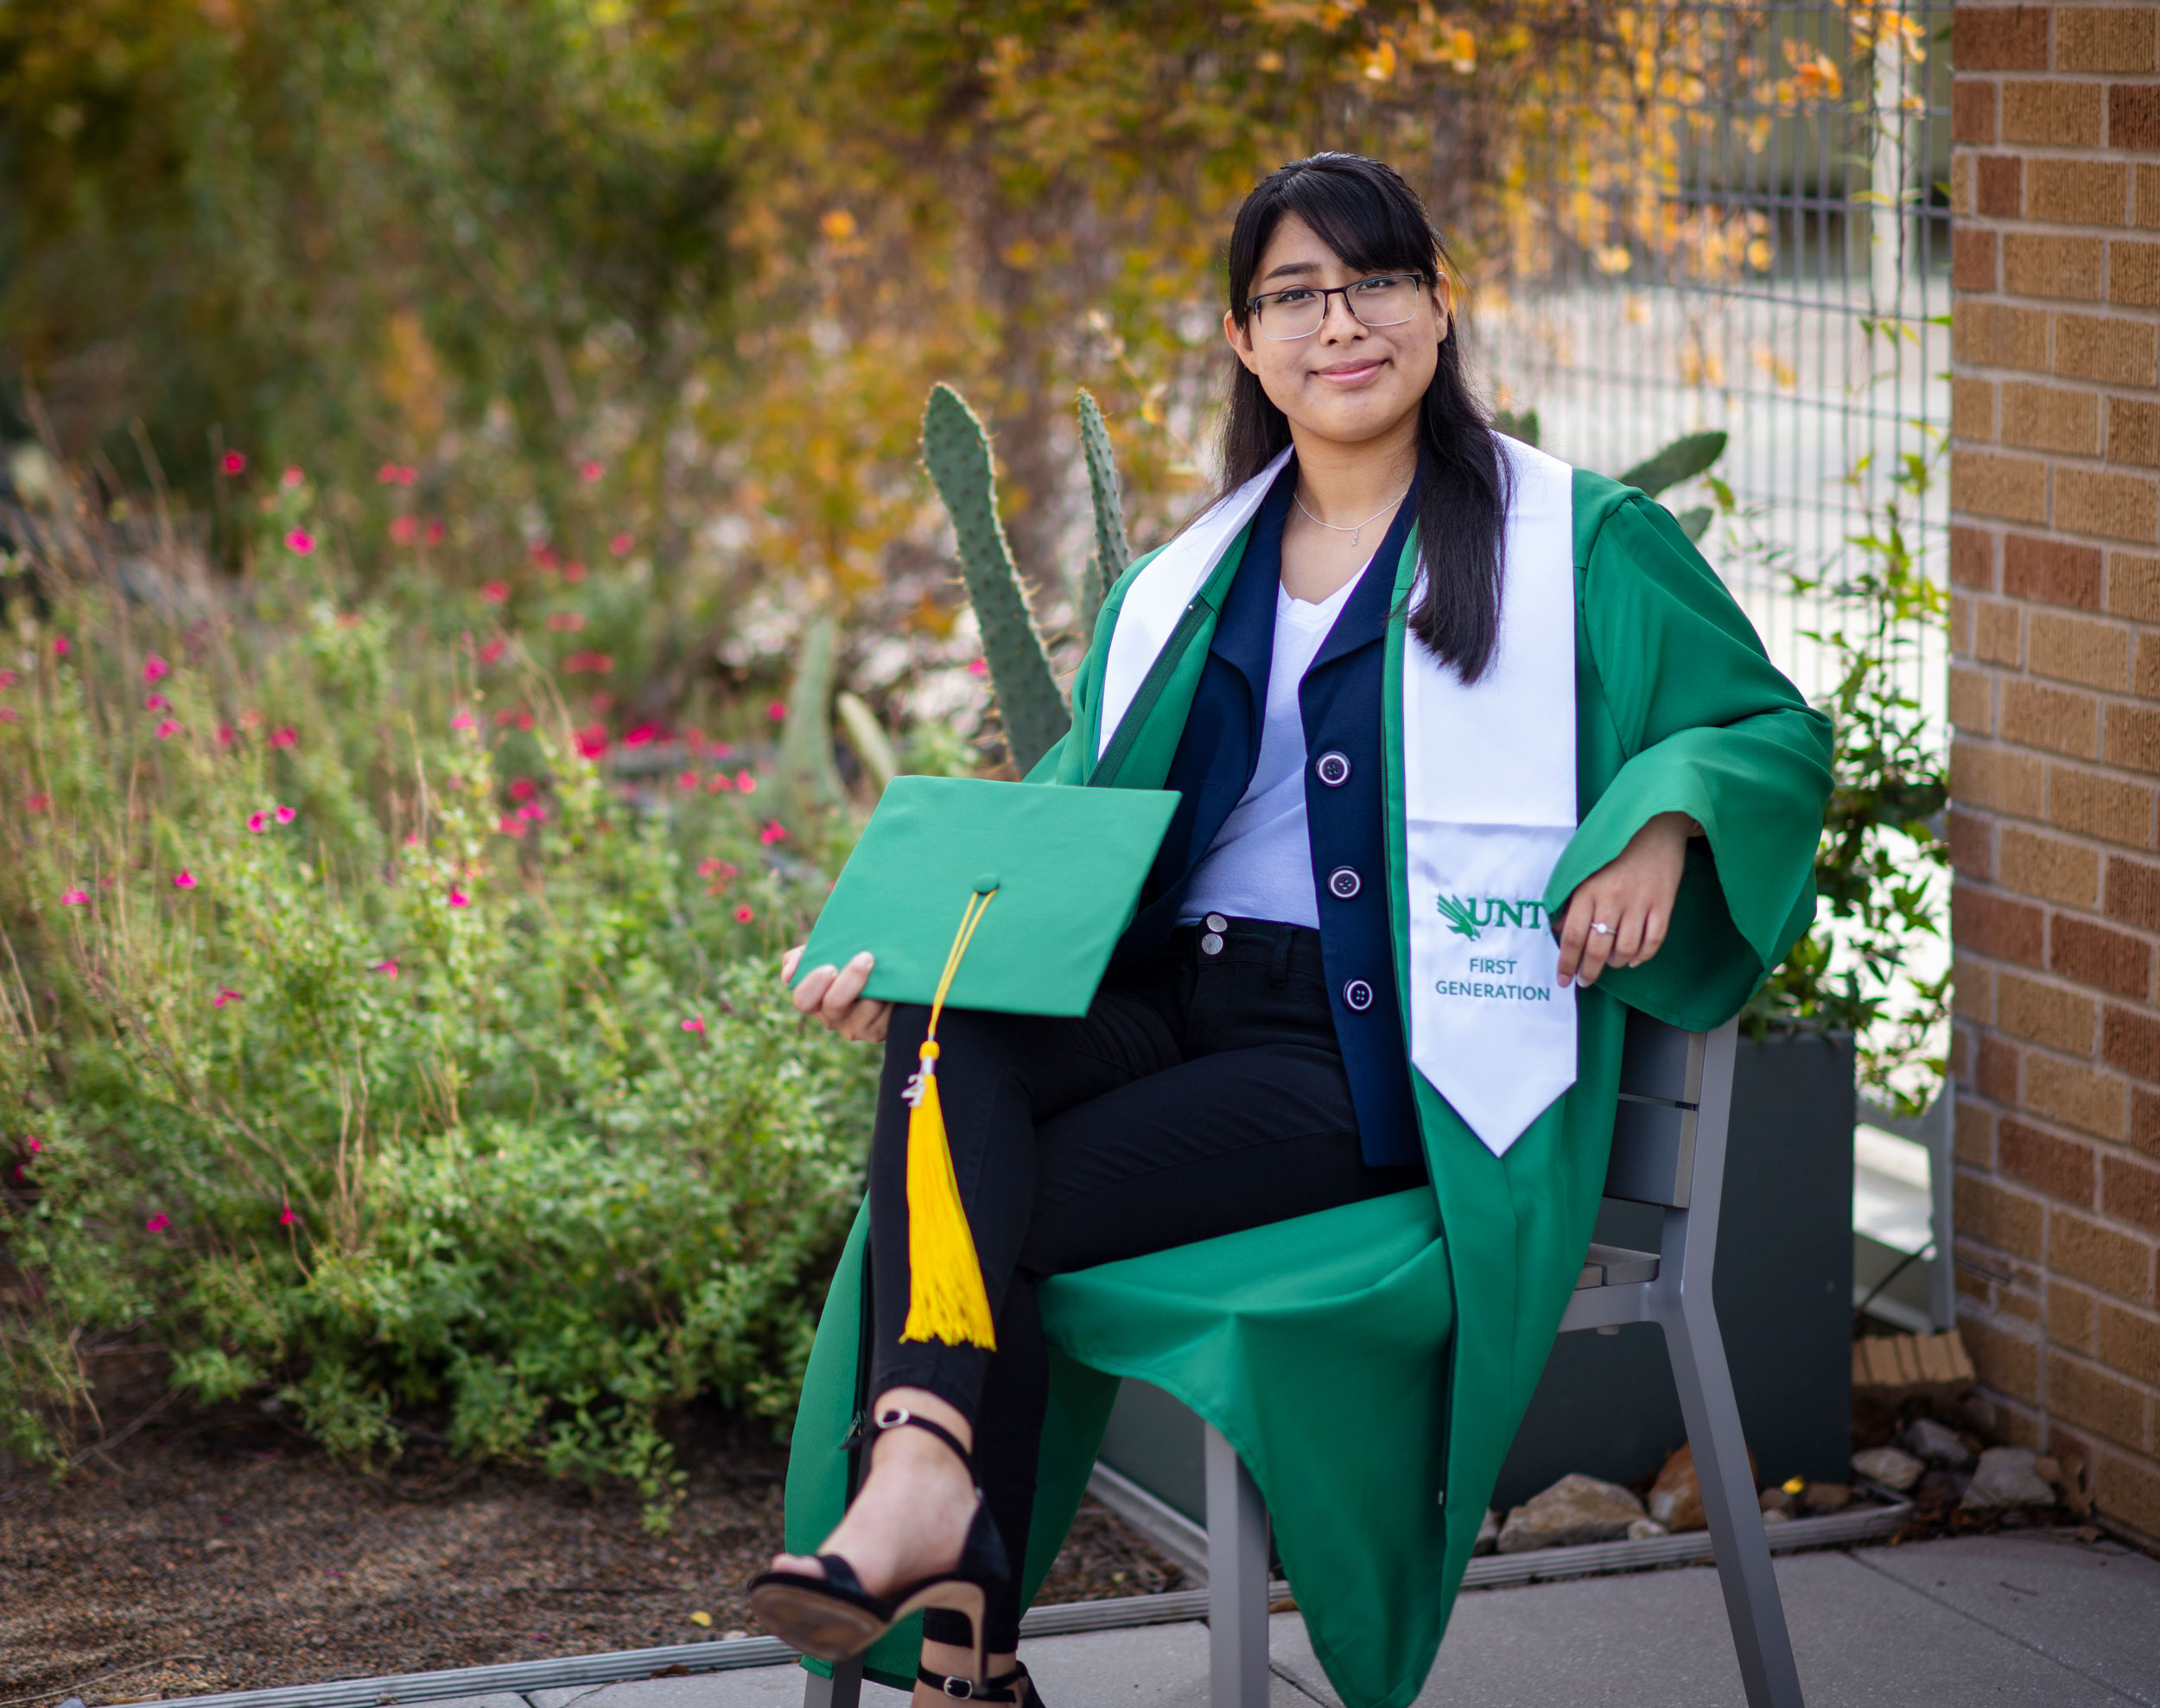 Following graduation, Lucia Arroyo will attend UNT’s Toulouse Graduate School to pursue a master’s and ultimately a doctorate in clinical psychology.